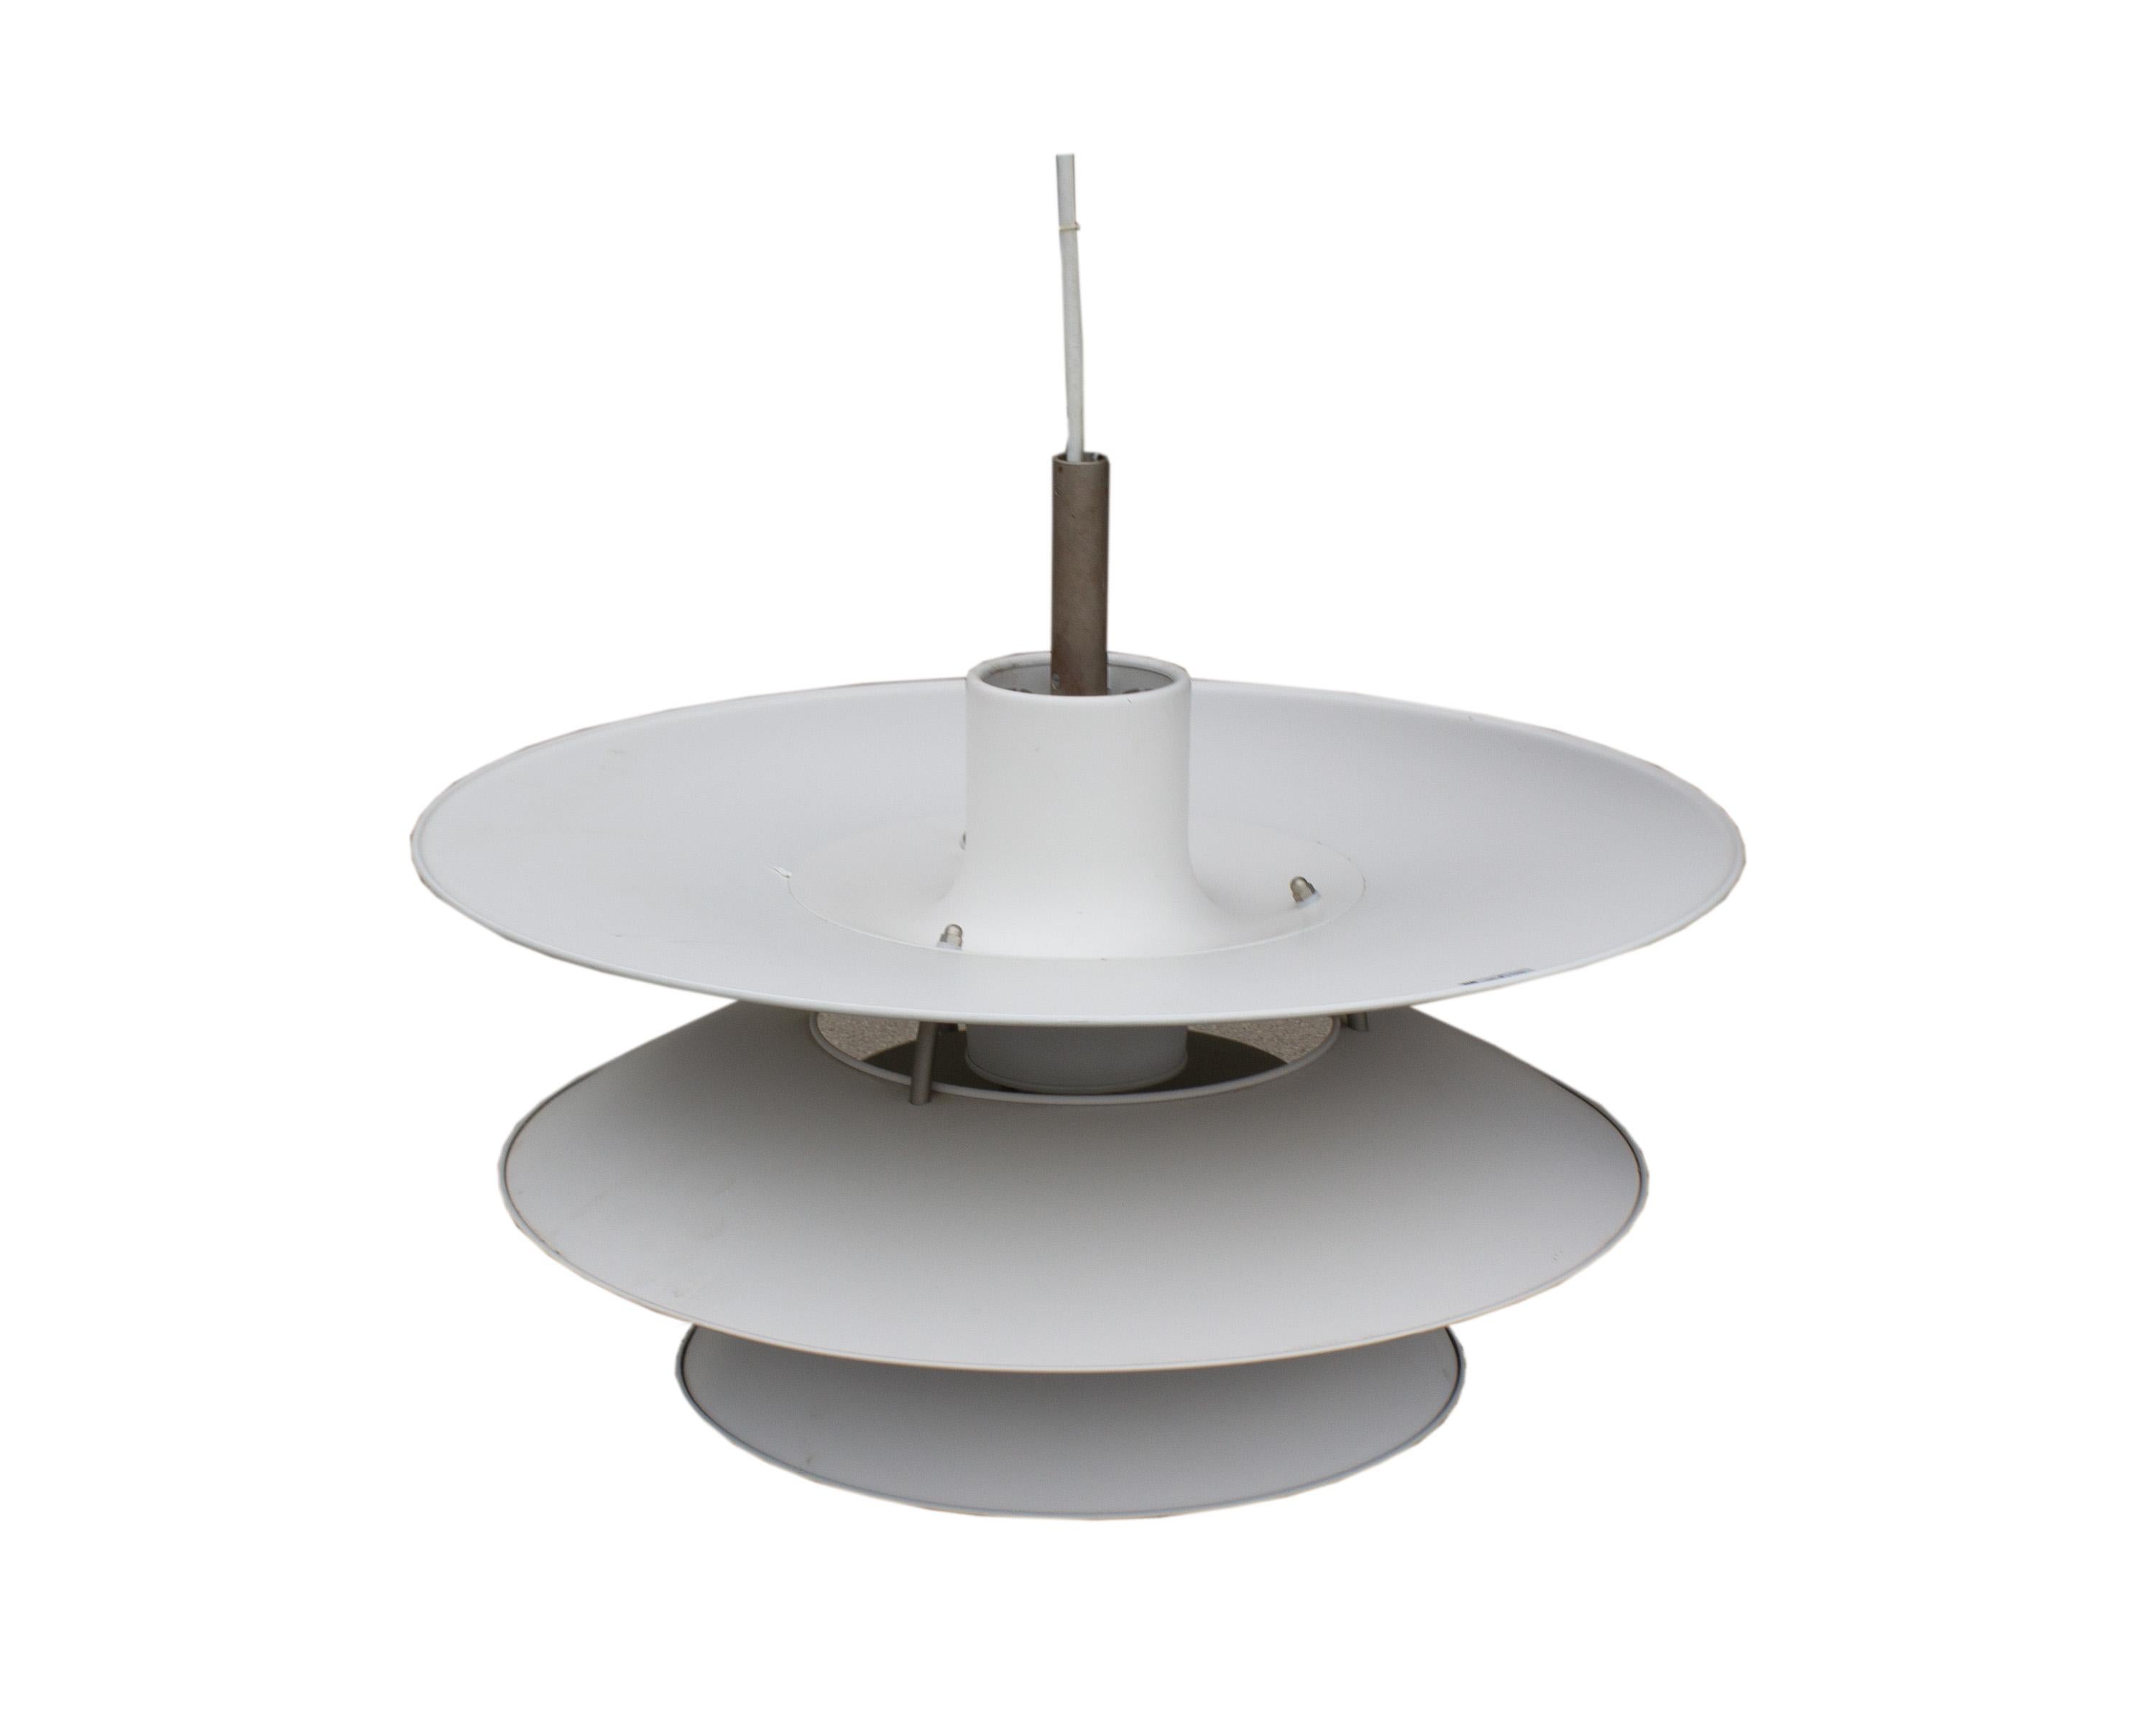 A PH6 hanging pendant lamp by Danish designer Poul Henningsen (1894-1967) for Louis Poulsen. This light, white in color, features the iconic design of Louis Poulsen pendant lights with distinct layering. Three bottom layers curve downward, while the